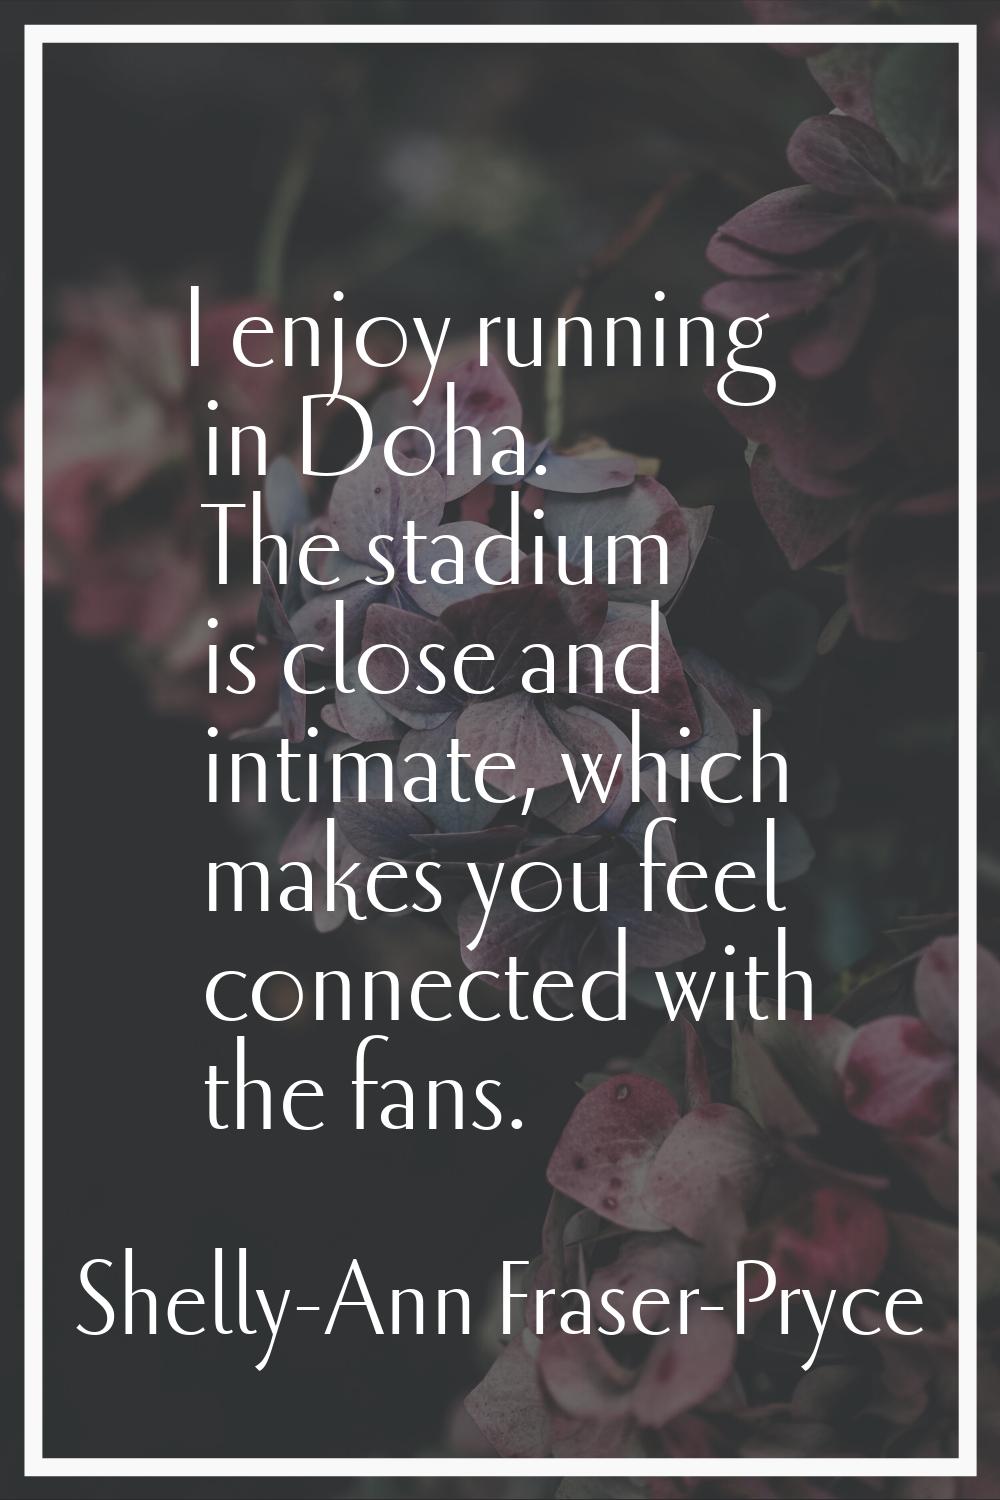 I enjoy running in Doha. The stadium is close and intimate, which makes you feel connected with the